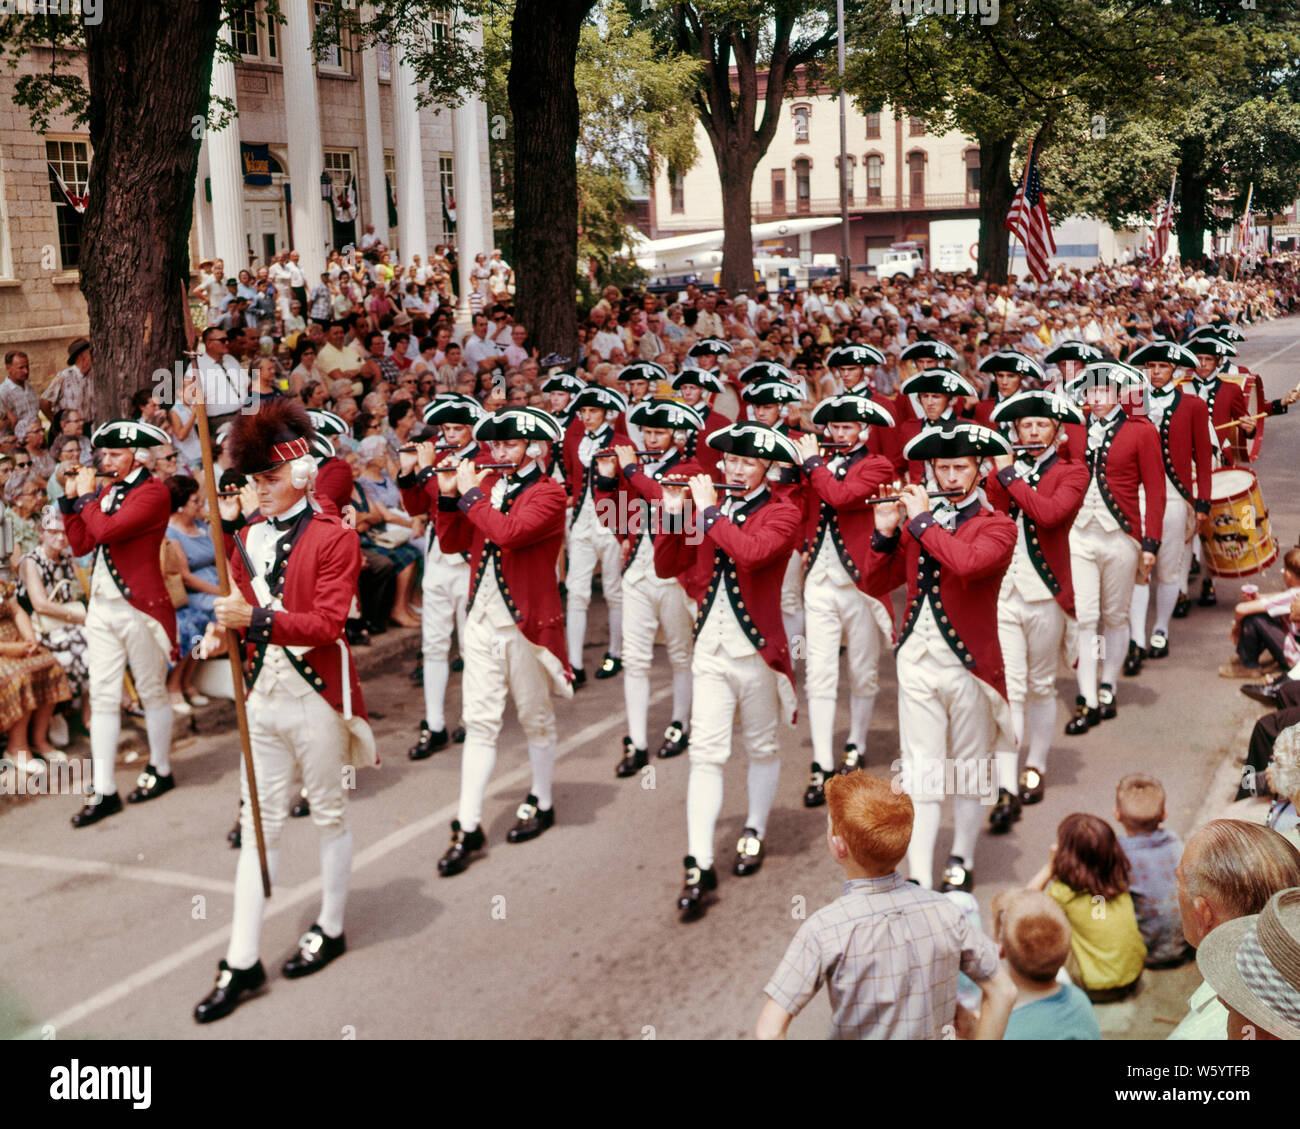 1960s UNITED STATES ARMY OLD GUARD FIFE AND DRUM CORPS MARCHING IN SMALL TOWN PARADE WELLSBORO PA USA - kp1368 SHE001 HARS LIFESTYLE ACTOR HISTORY CELEBRATION FEMALES JOBS UNITED STATES COPY SPACE FULL-LENGTH DRUMS PERSONS UNITED STATES OF AMERICA FESTIVAL MALES TEENAGE GIRL TEENAGE BOY LAUREL PROFESSION ENTERTAINMENT SPECTATORS MUSICIANS NORTH AMERICA FREEDOM NORTH AMERICAN PERFORMING ARTS WIDE ANGLE SKILL OCCUPATION SKILLS HIGH ANGLE STRENGTH VICTORY CAREERS EXCITEMENT PA POWERFUL BASS PRIDE AUTHORITY ENTERTAINER OCCUPATIONS UNIFORMS SNARE DISTINCTIVE CONCEPTUAL ACTORS FIFE STYLISH 1781 Stock Photo